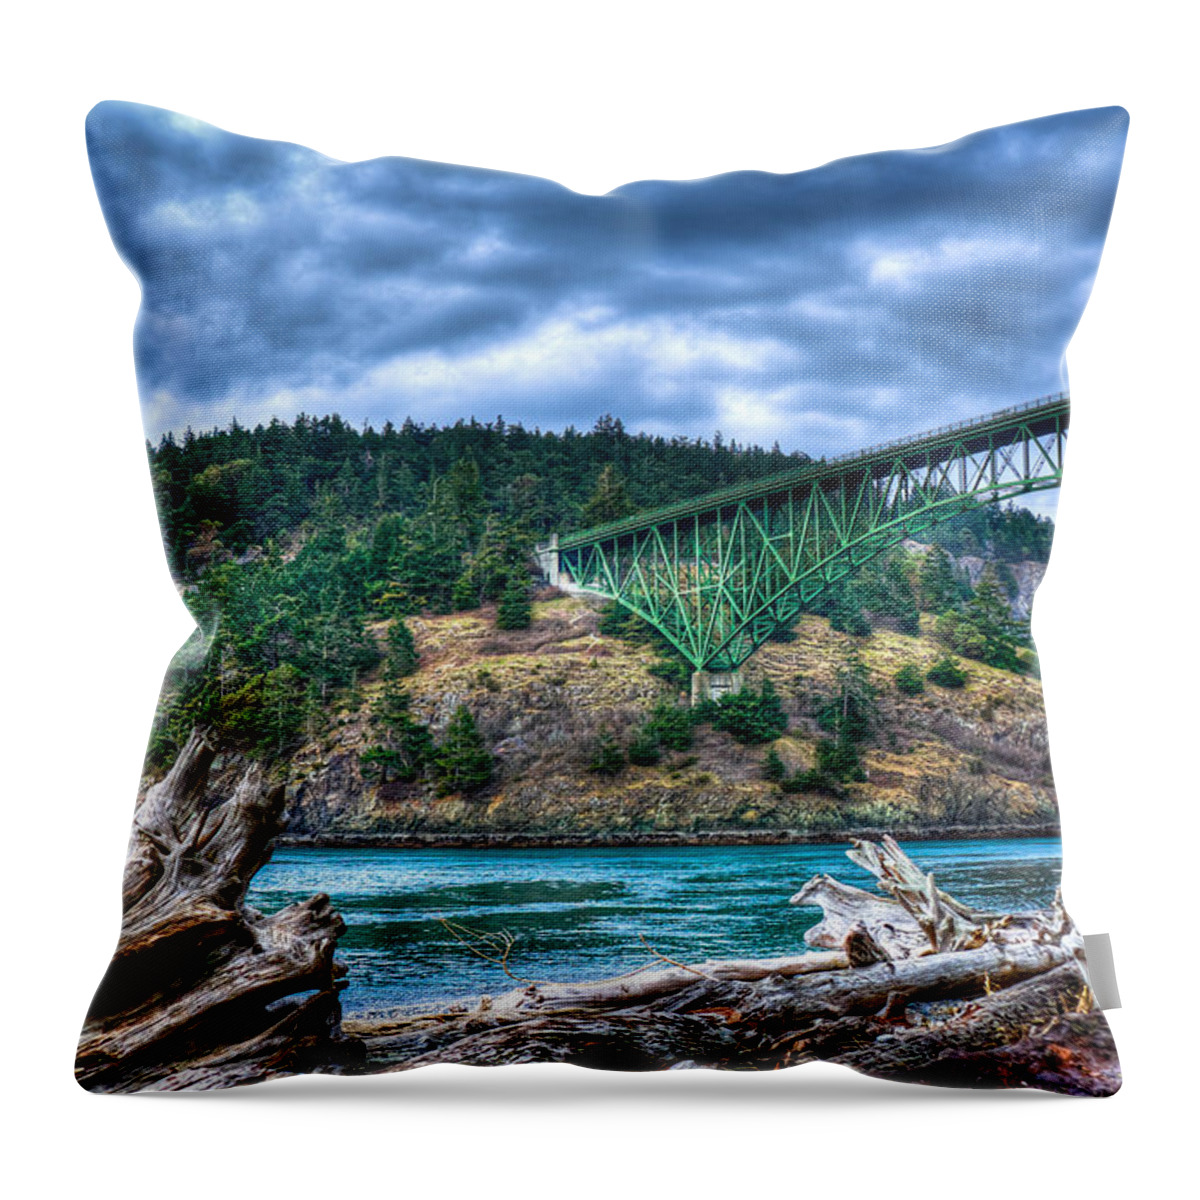 Hdr Throw Pillow featuring the photograph Deception Pass Bridge by David Patterson